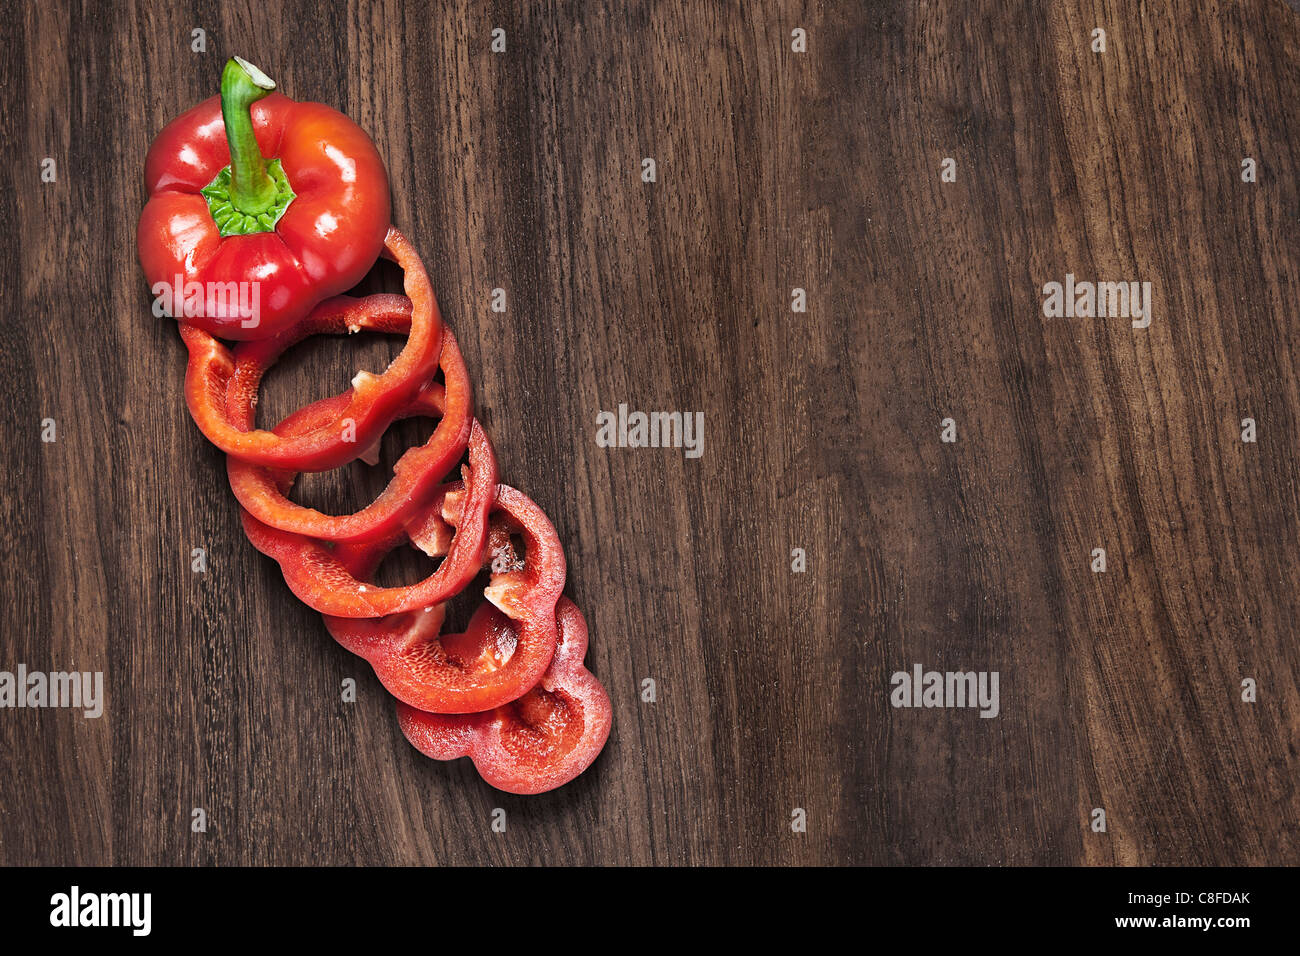 Chopped Red Pepper on Chopping Board Stock Photo